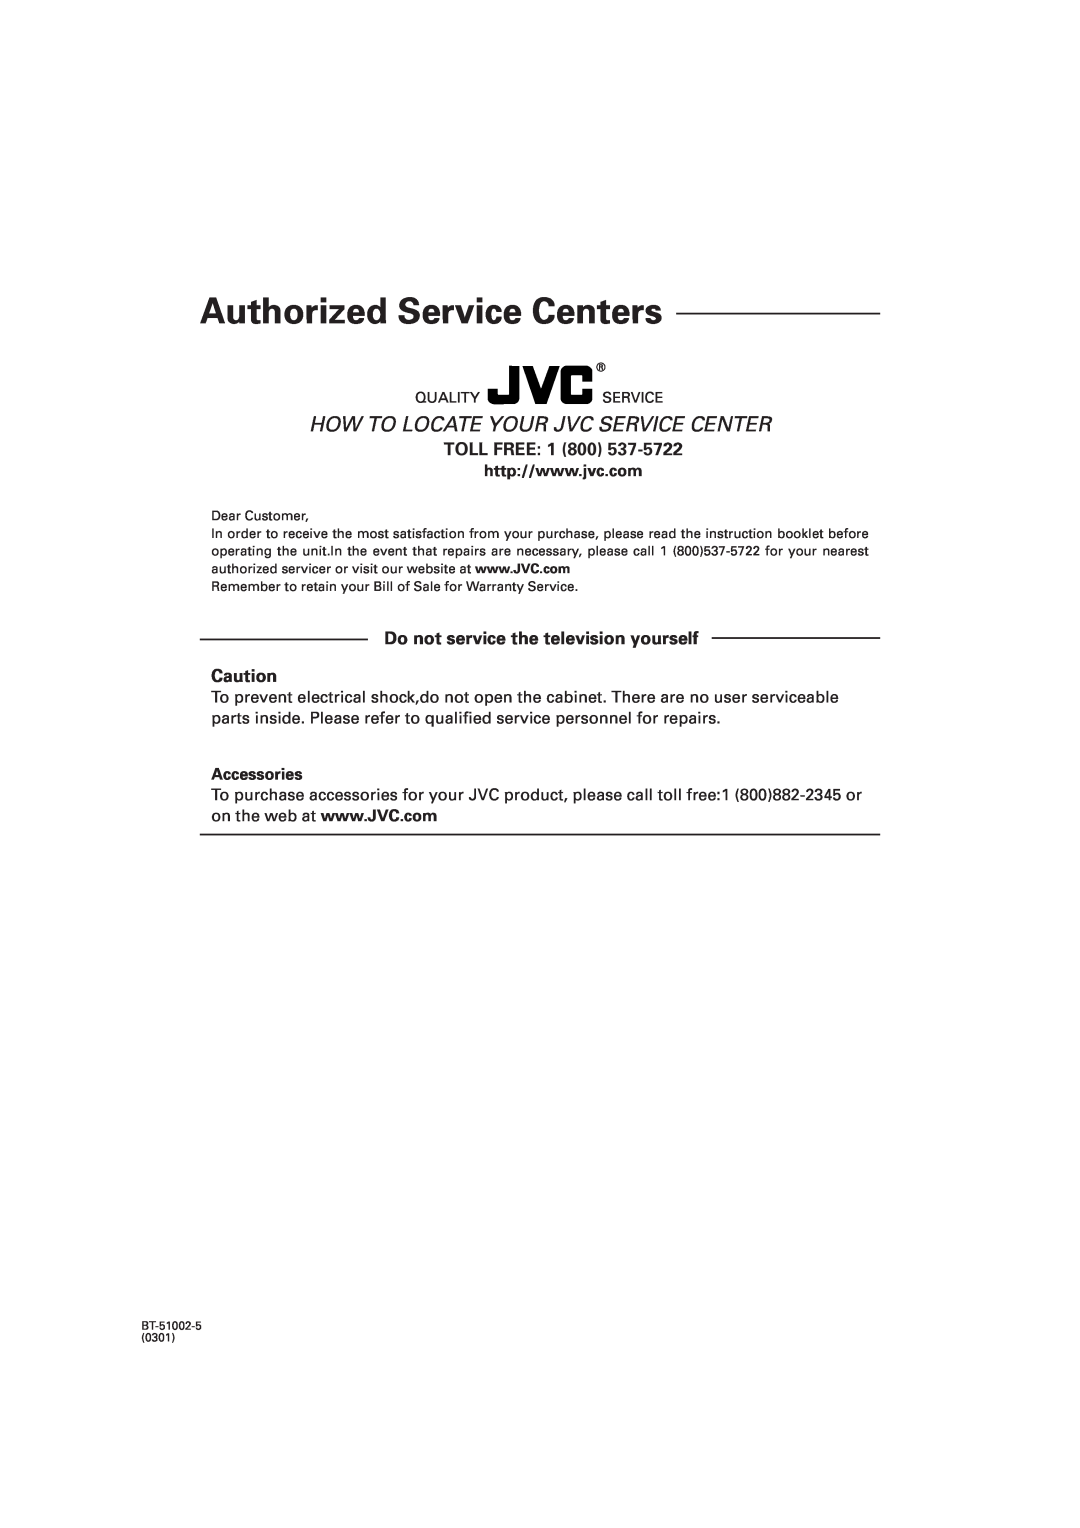 JVC RX-7020VBK manual Toll Free, Do not service the television yourself, Accessories, Authorized Service Centers 